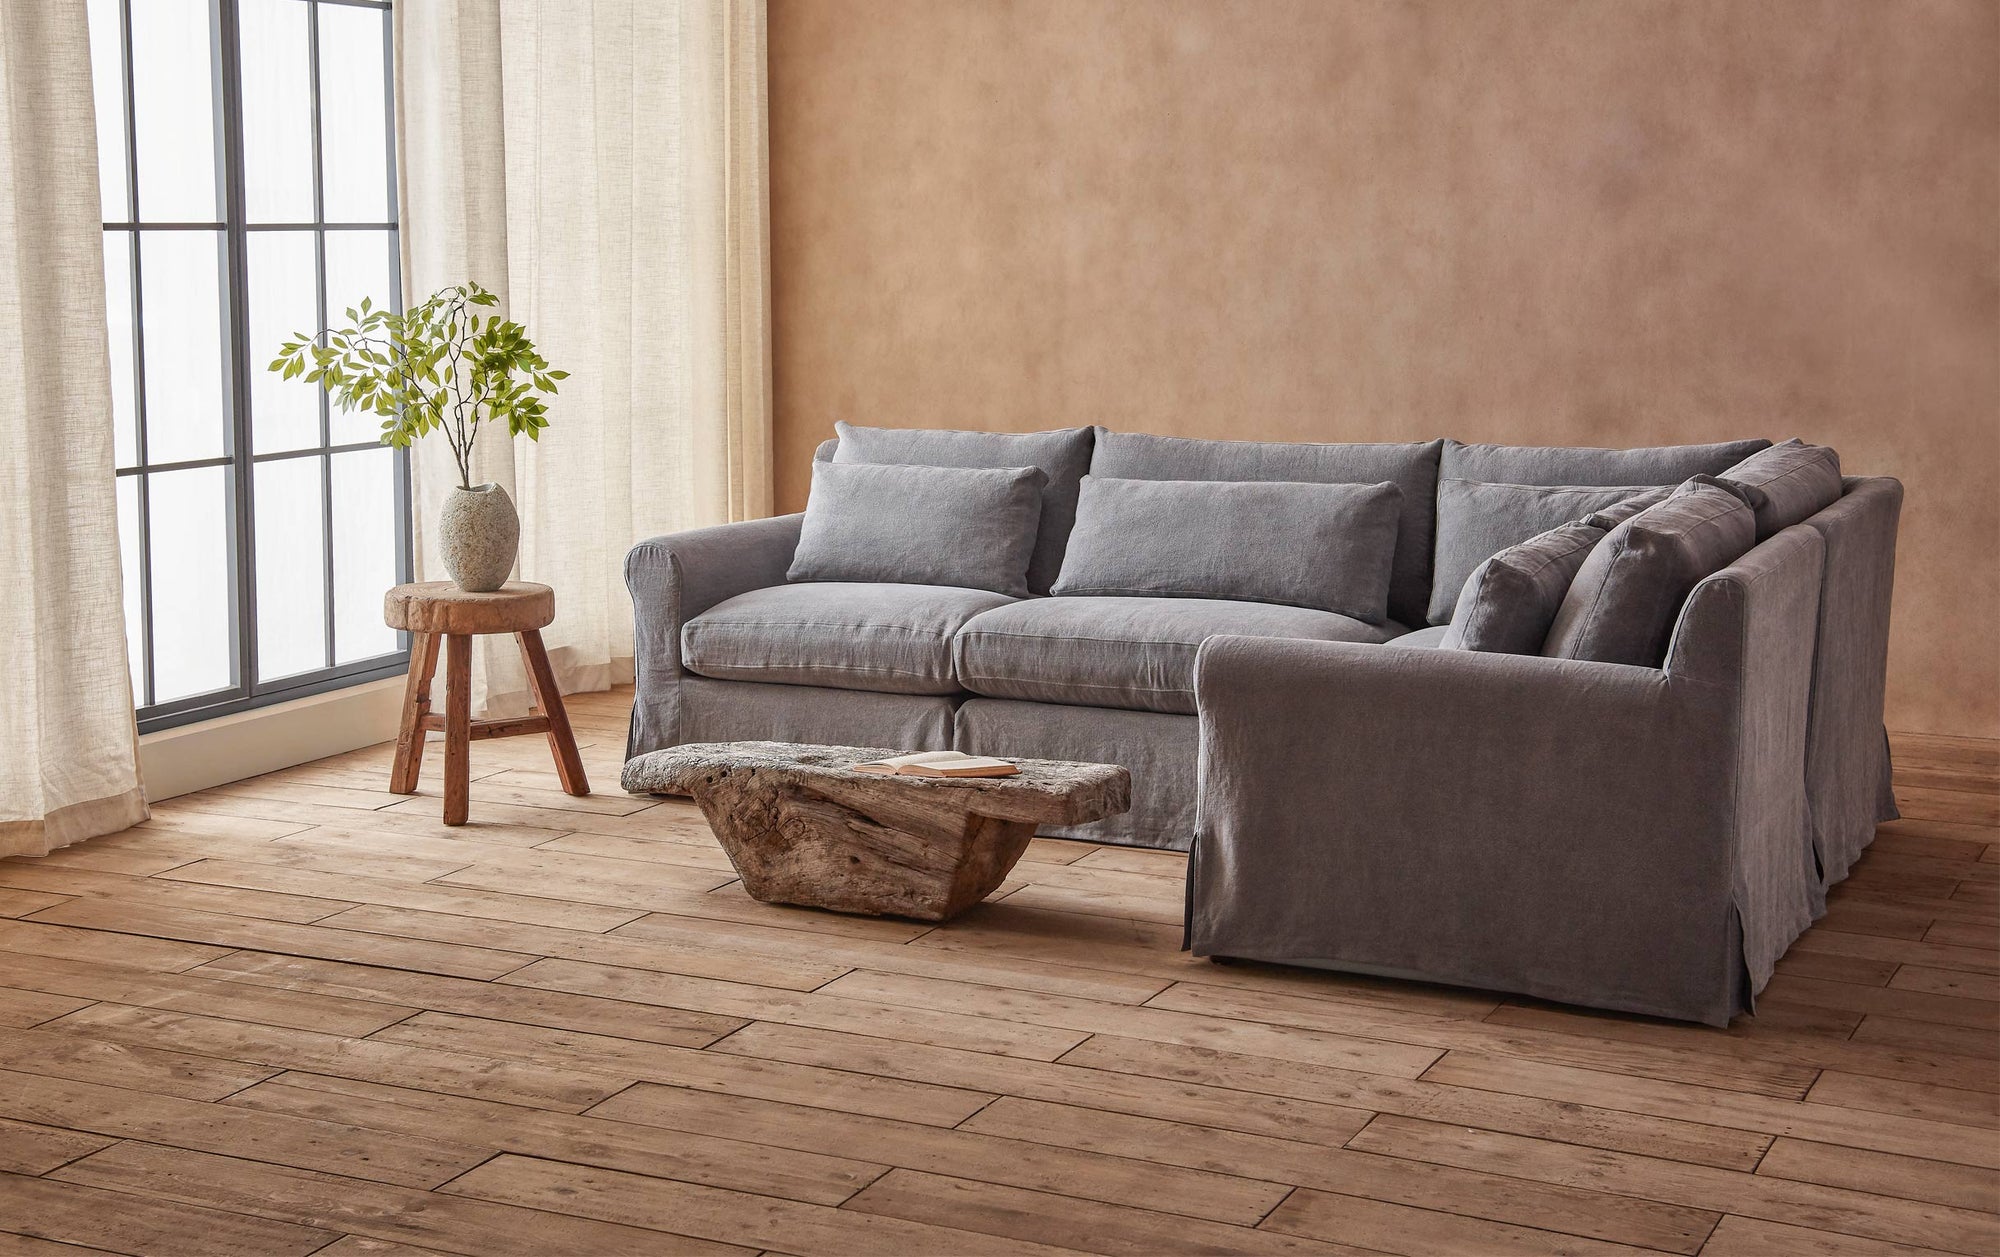 Elias L-Shape Sectional Sofa in Ink Cap, a medium cool grey Light Weight Linen, placed in a sunlit room next to a coffee table and a stool